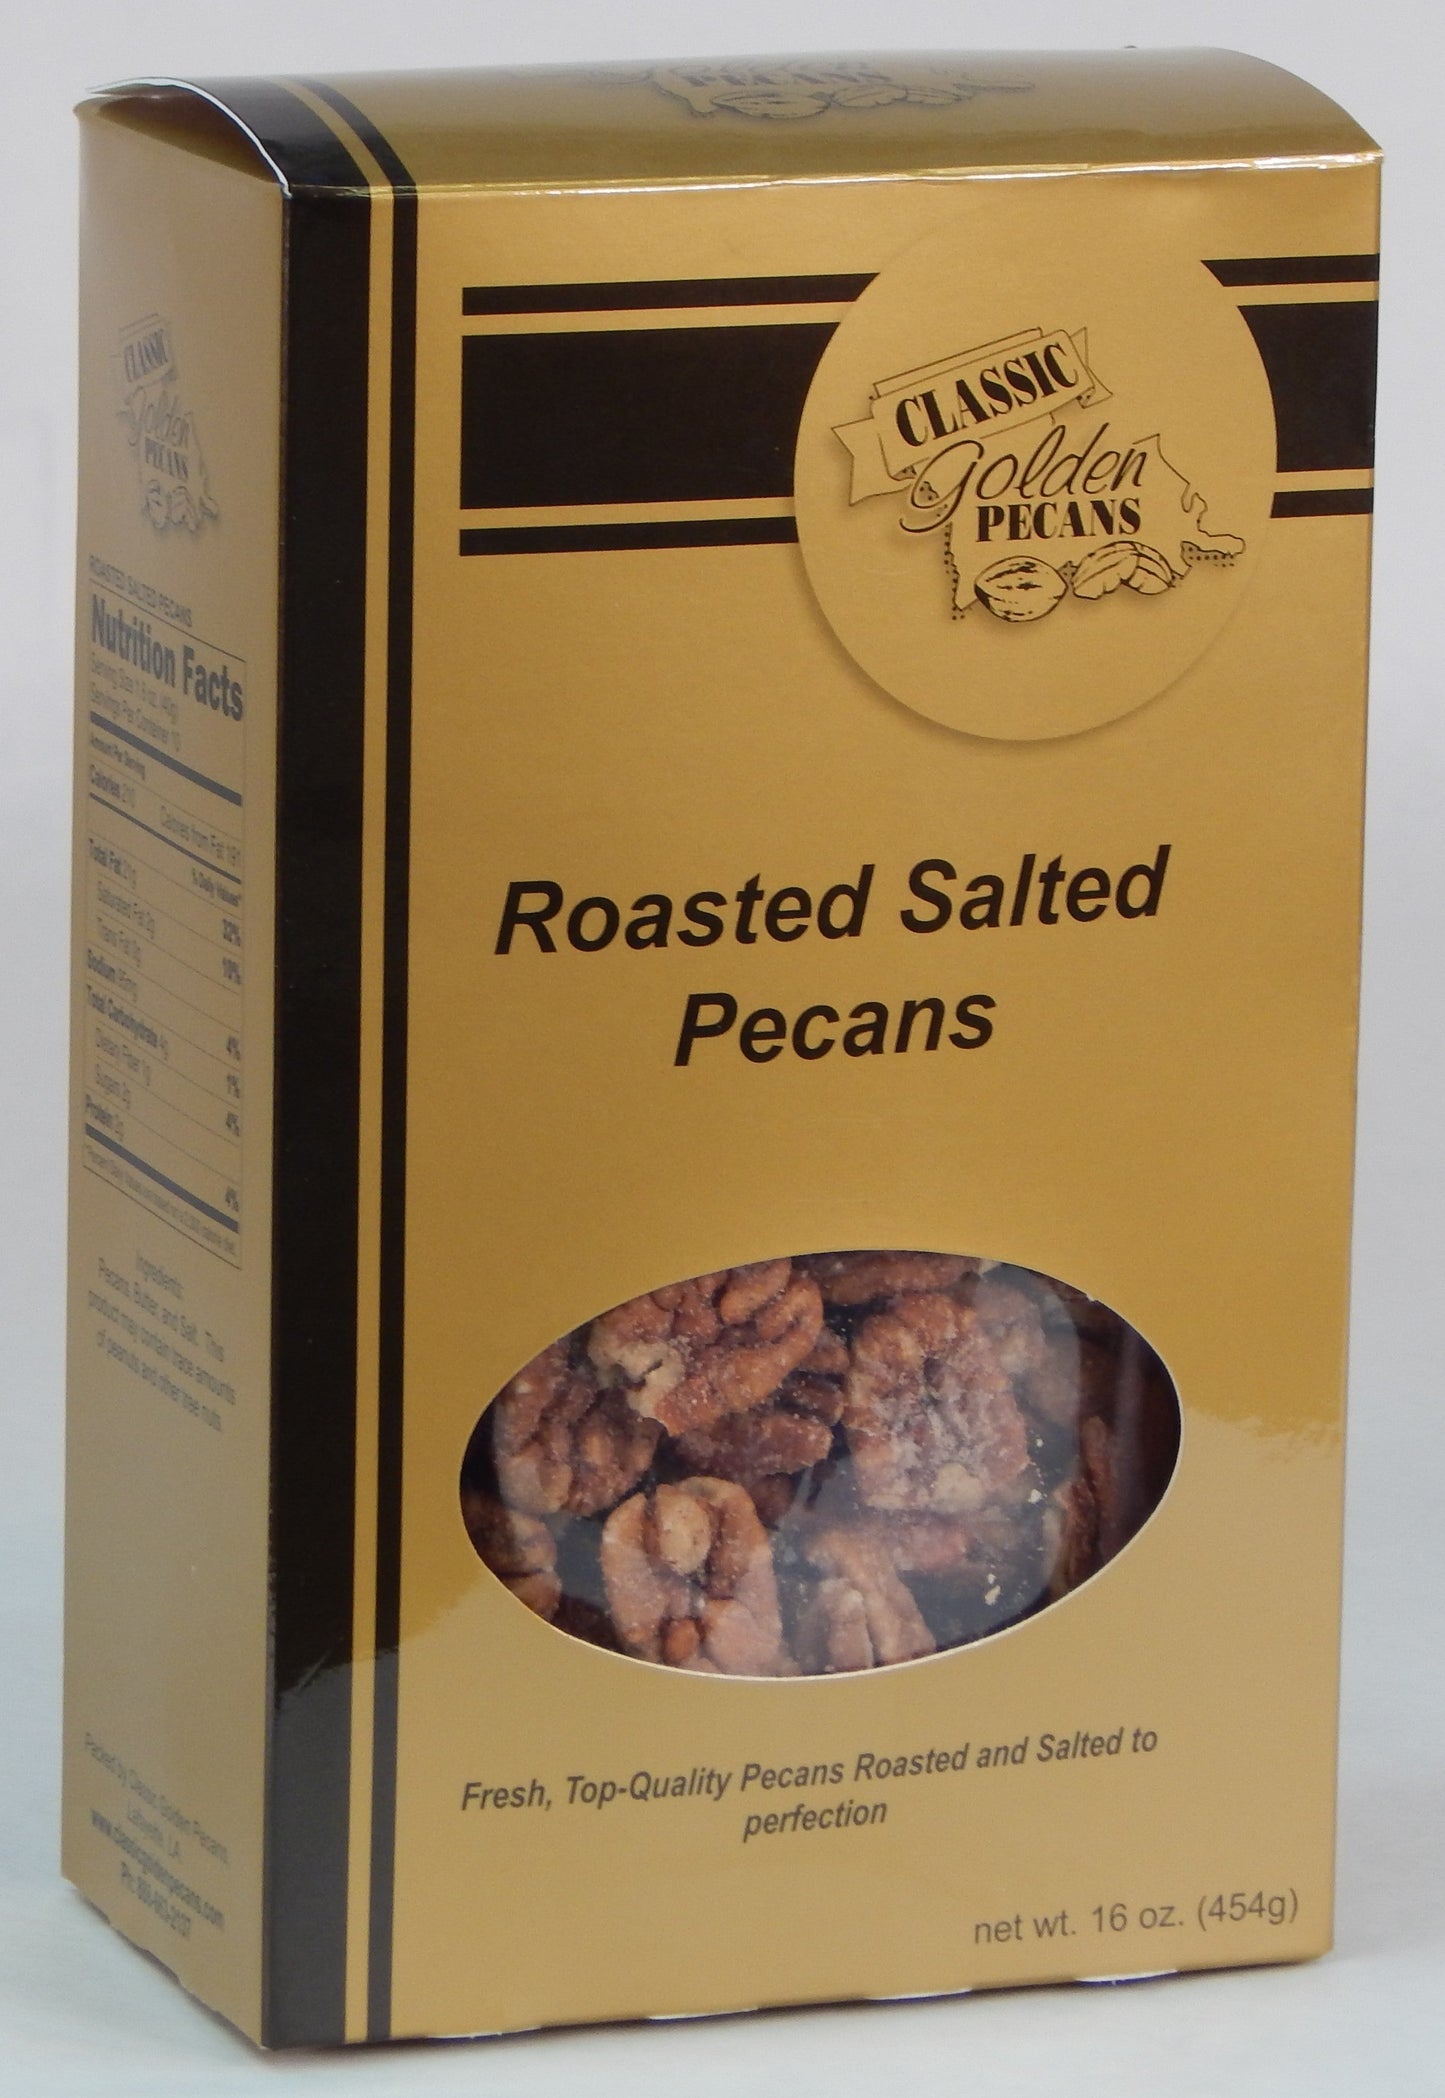 Roasted Salted Pecans by Classic Golden Pecans